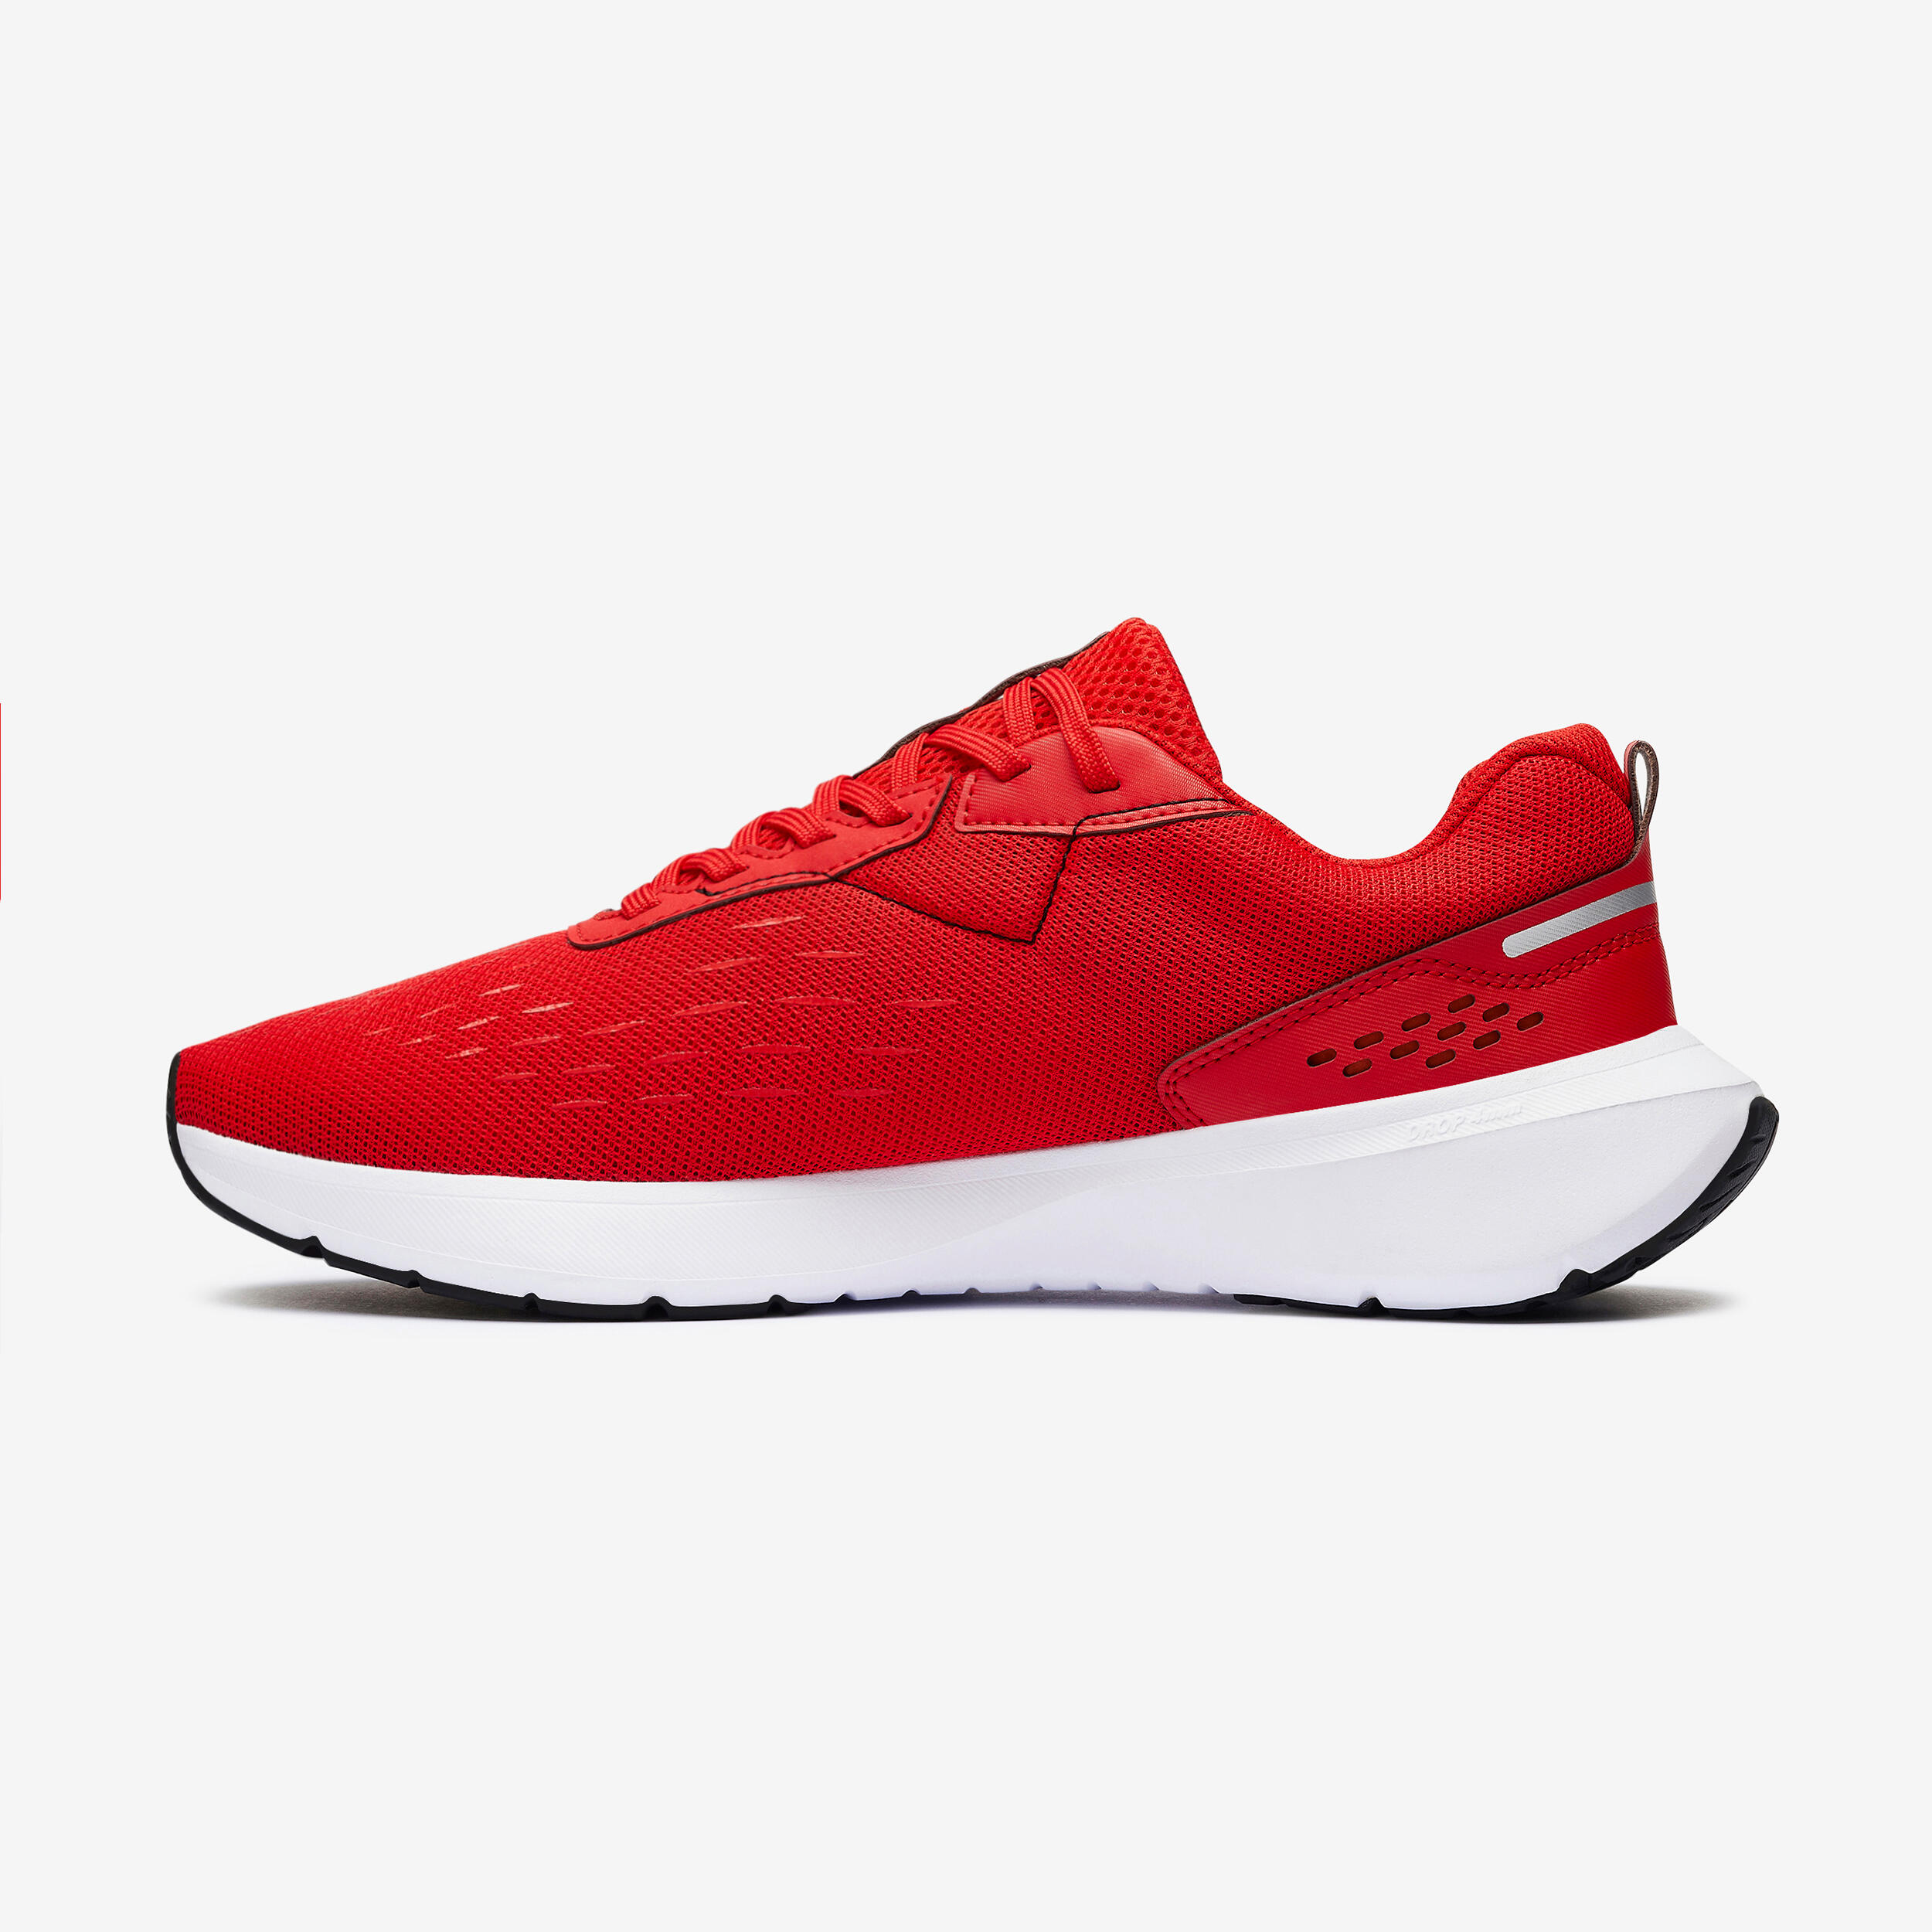 SukunSports Sneaker Shoes-RED